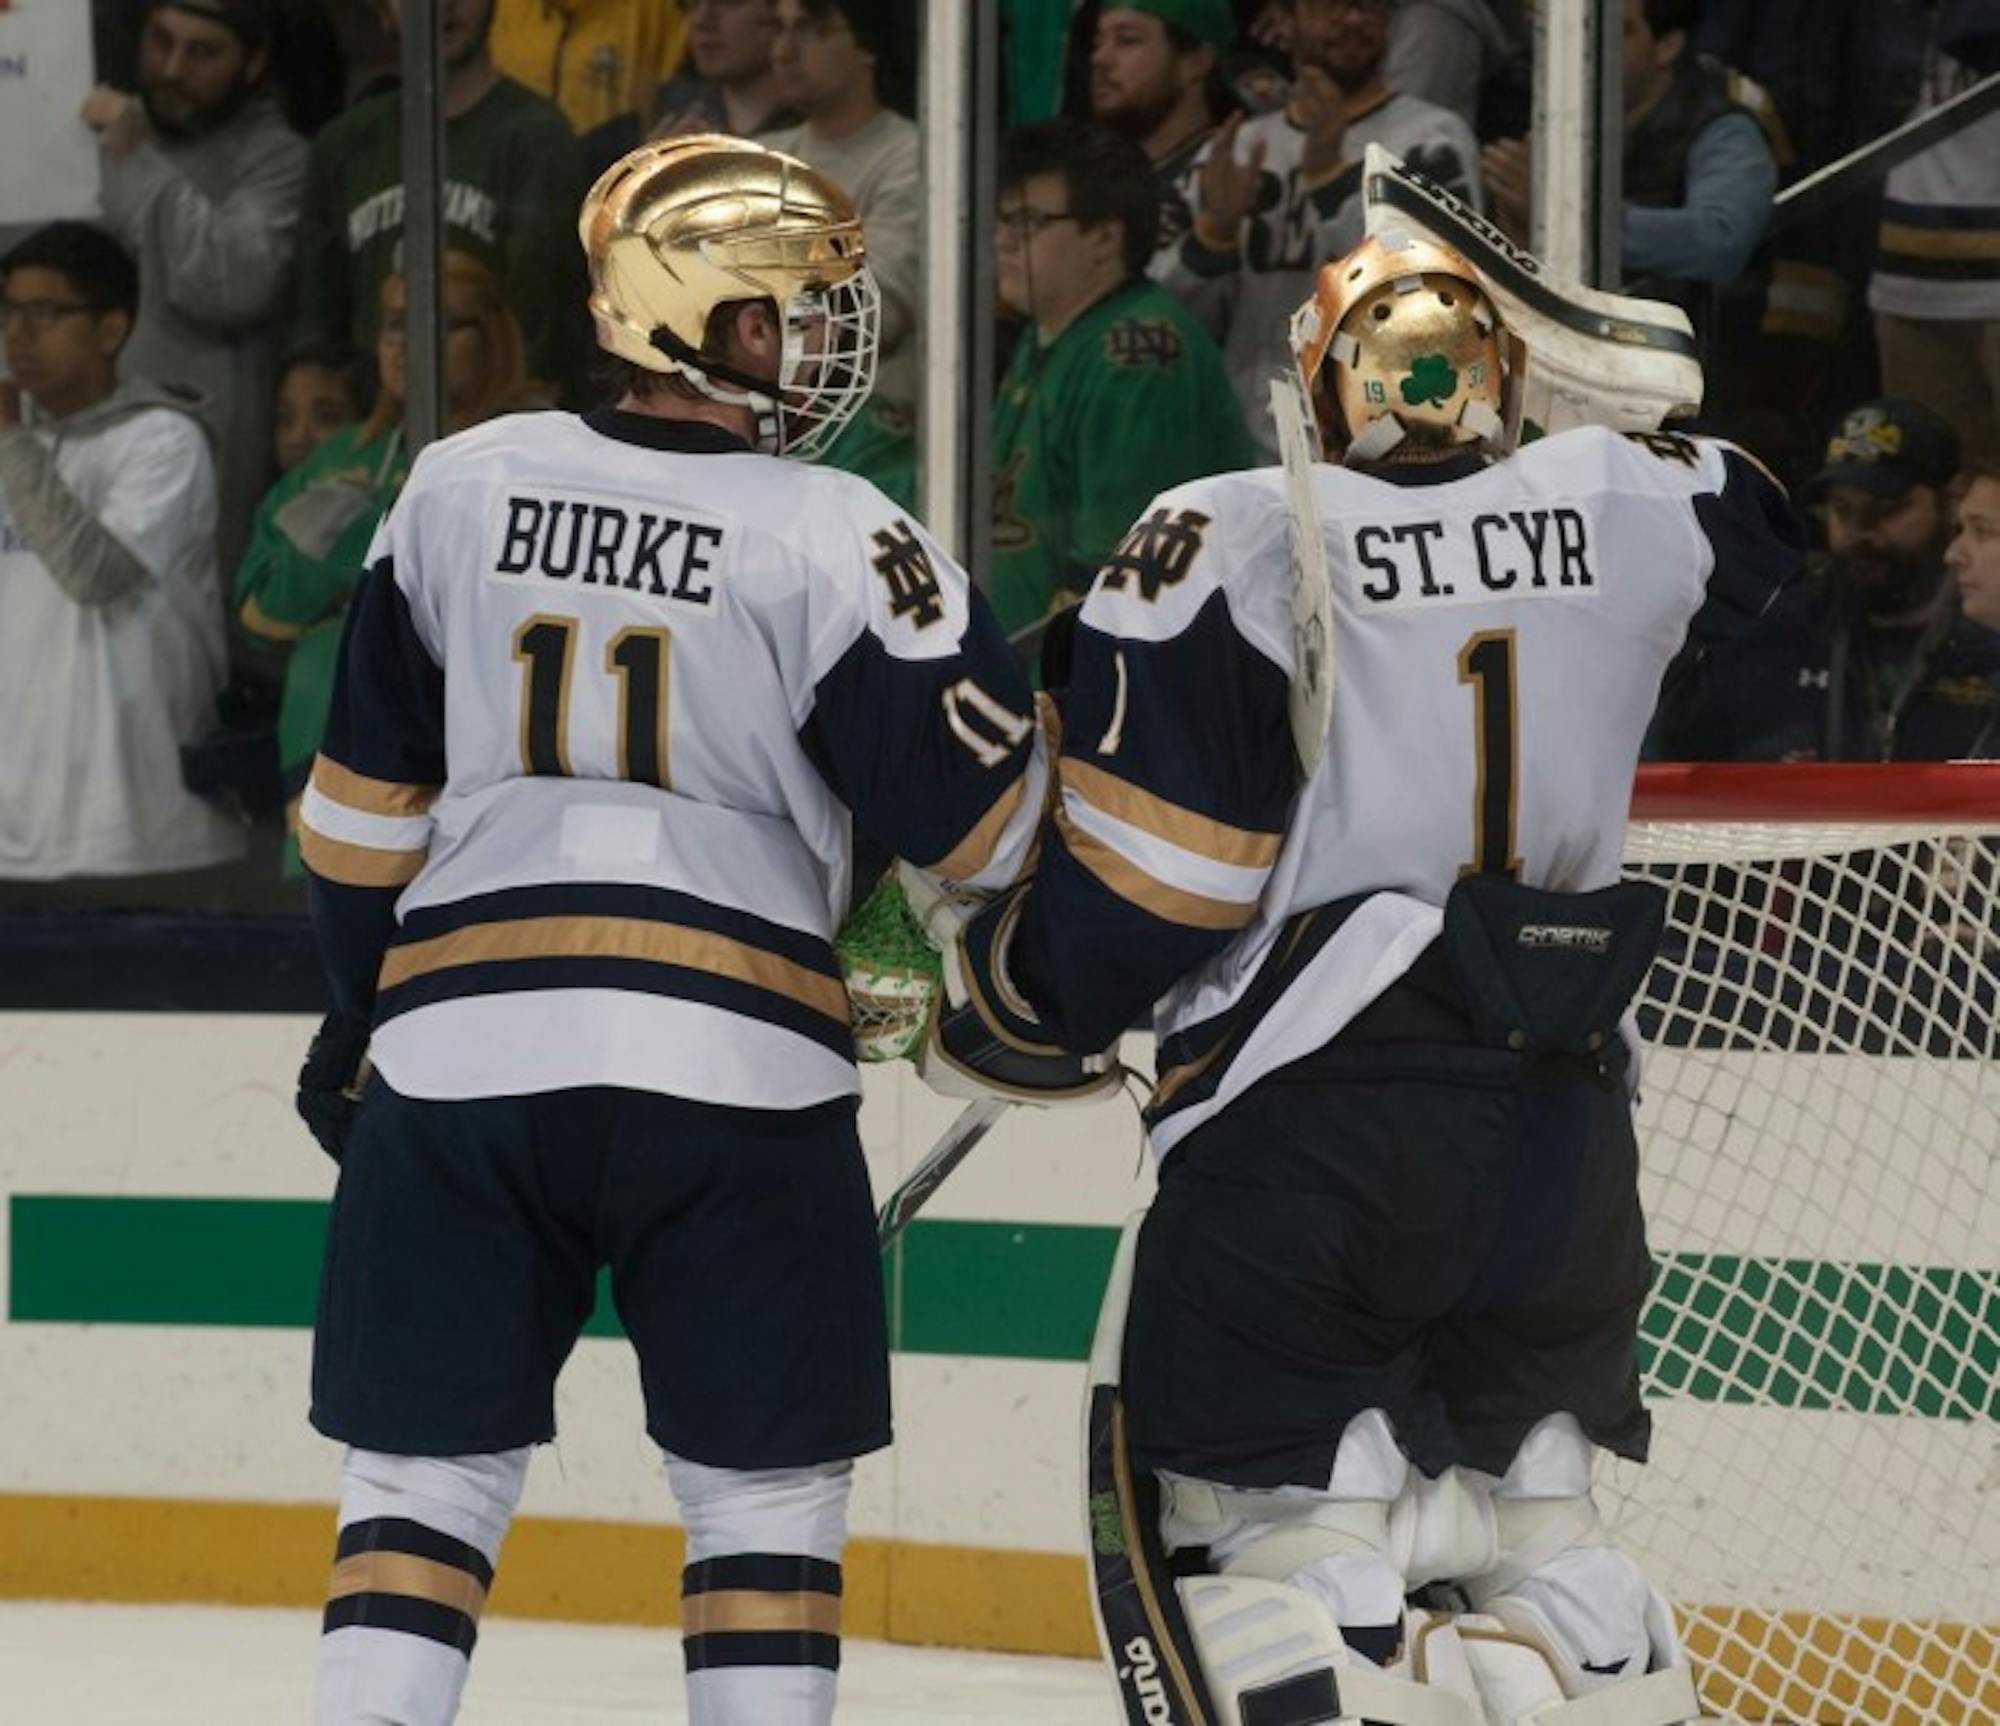 Irish sophomore forward Cal Burke and freshman goaltender Dylan St. Cyr talk during a break in the action during Notre Dame's 2-2 tie against Denver on Oct. 13 at Compton Family Ice Arena. St. Cyr finished with 46 saves on the night.